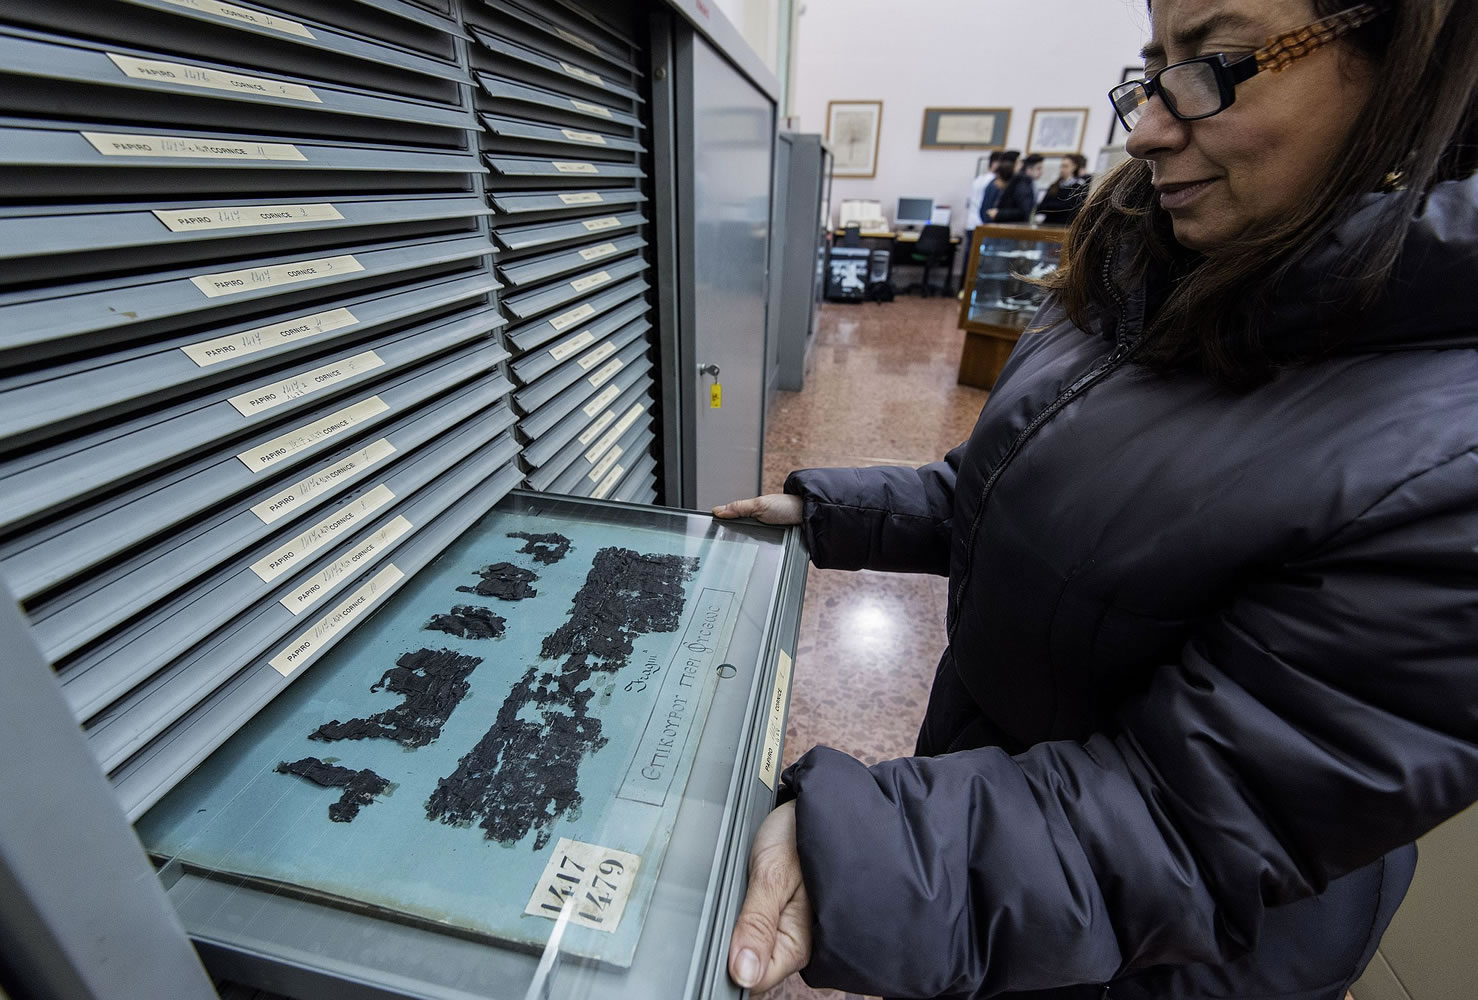 A woman shows the remains of an ancient papyrus at the Naples' National Library in Italy.